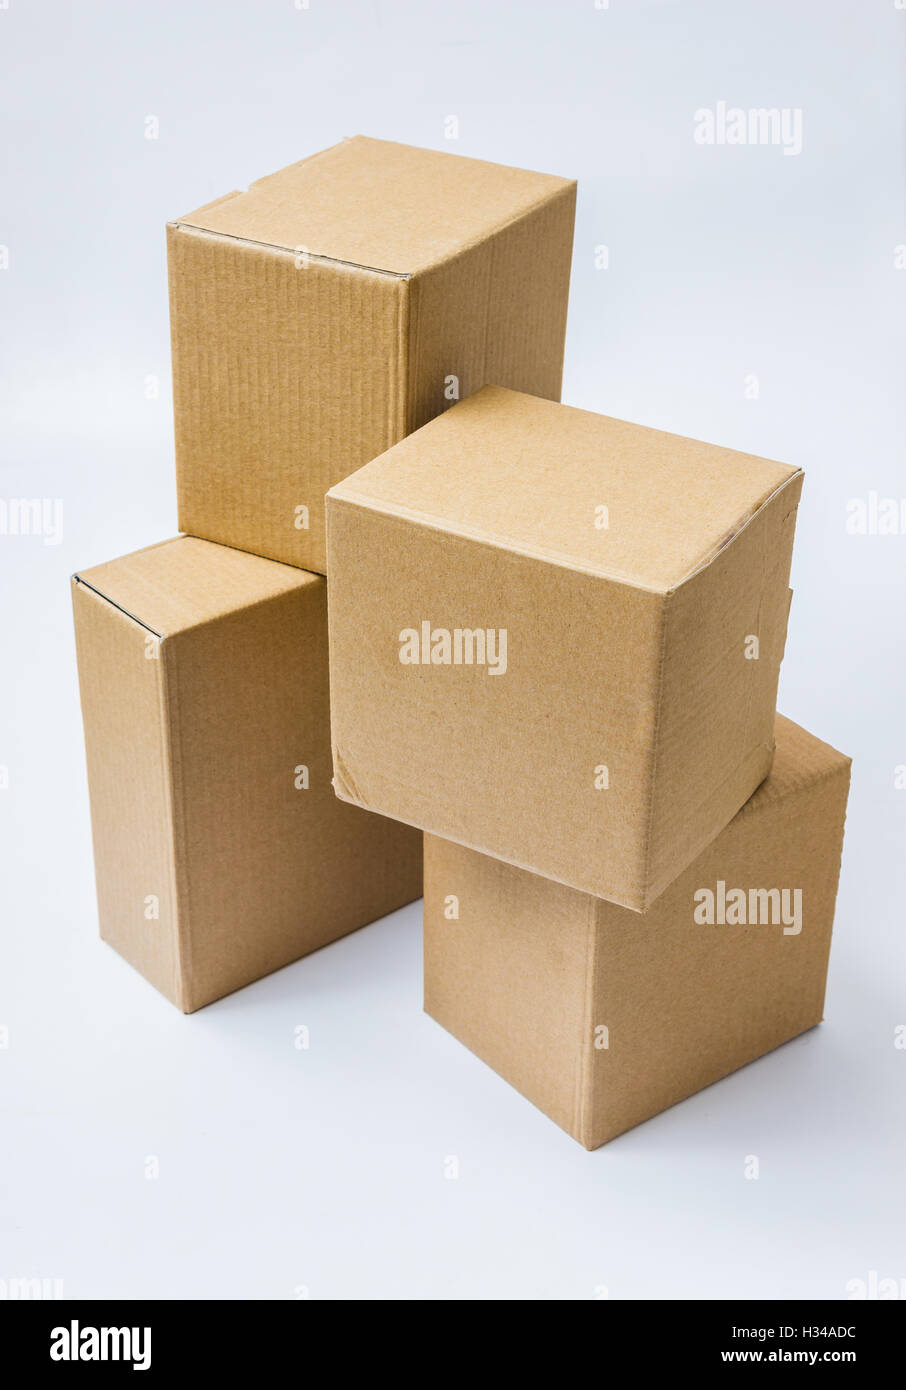 Cardboard boxes for goods and products Stock Photo